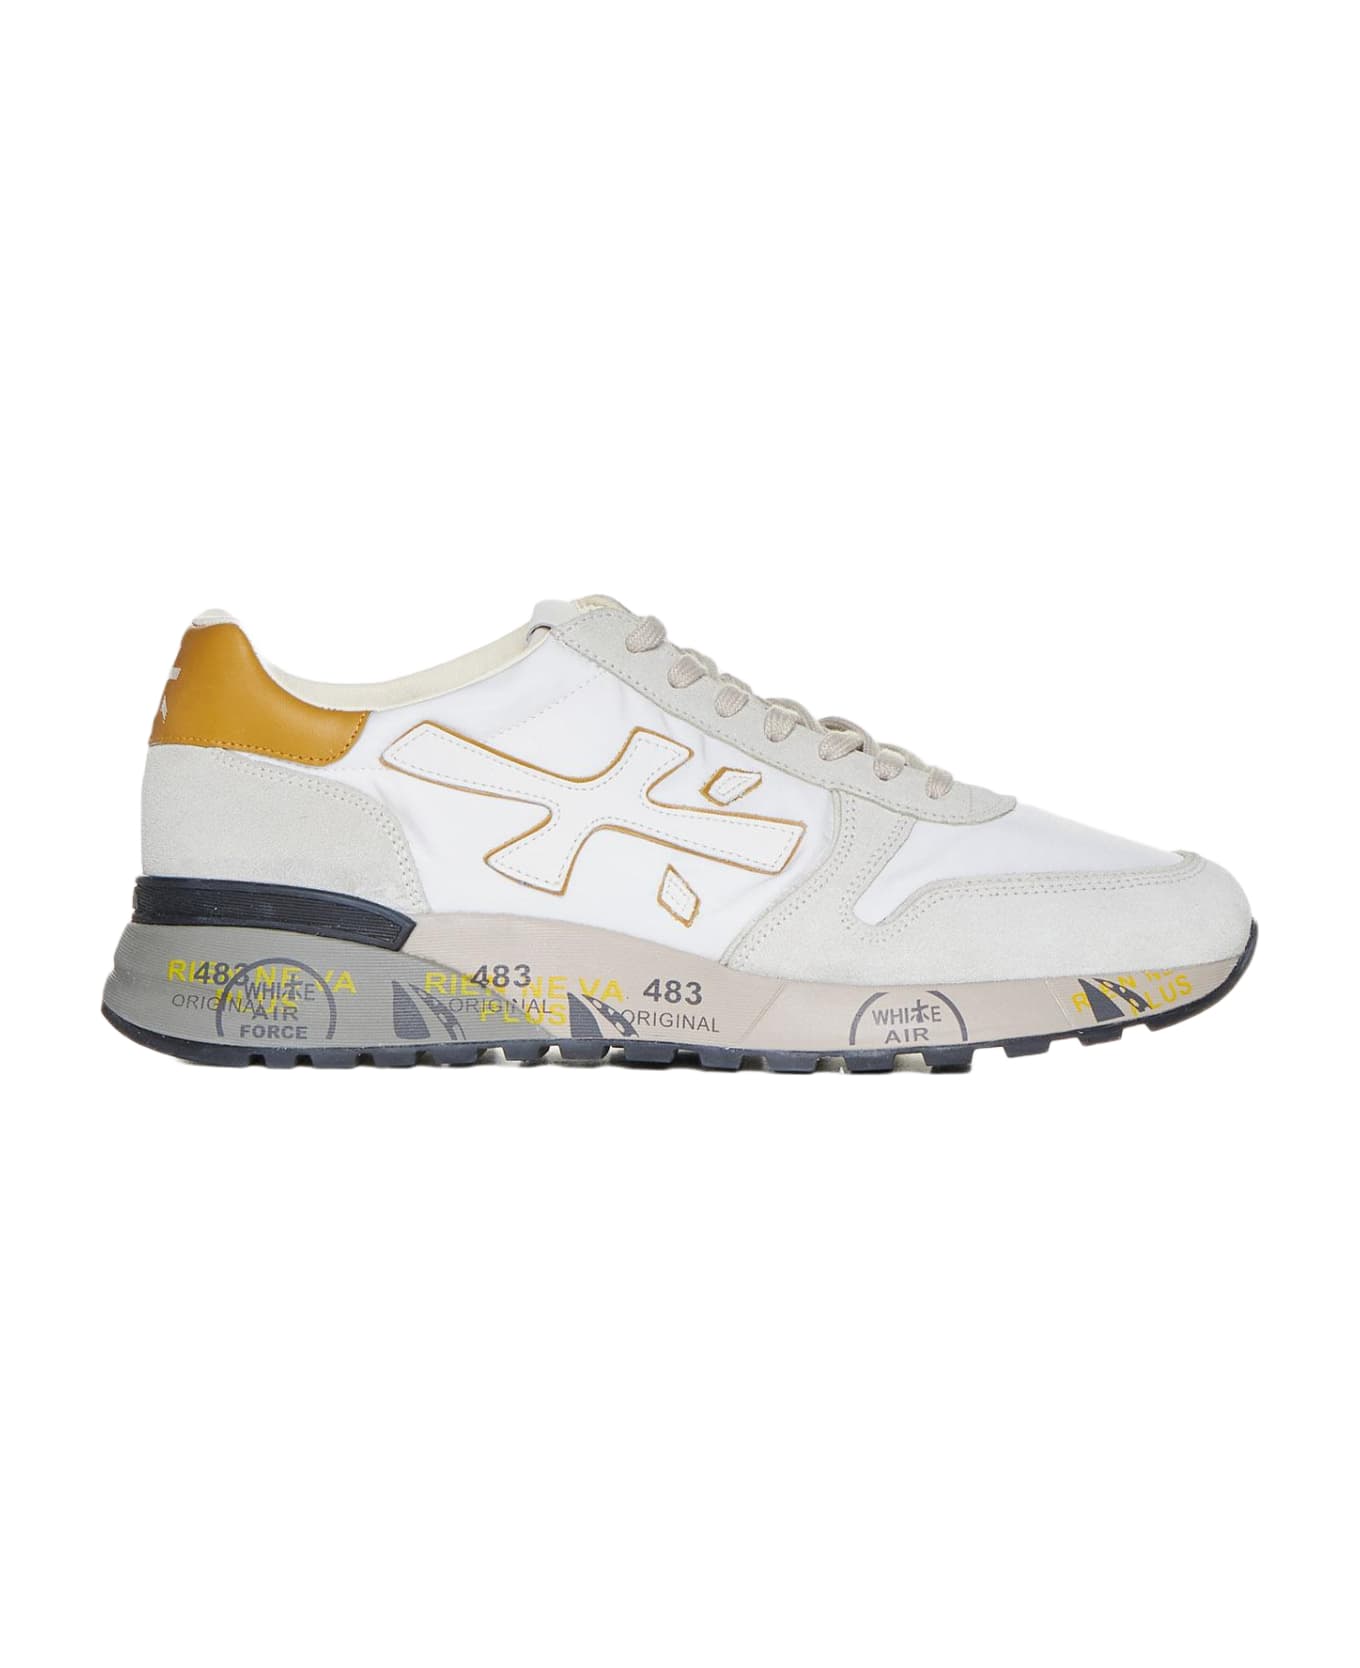 Premiata Mick Suede, Nylon And Leather Sneakers スニーカー